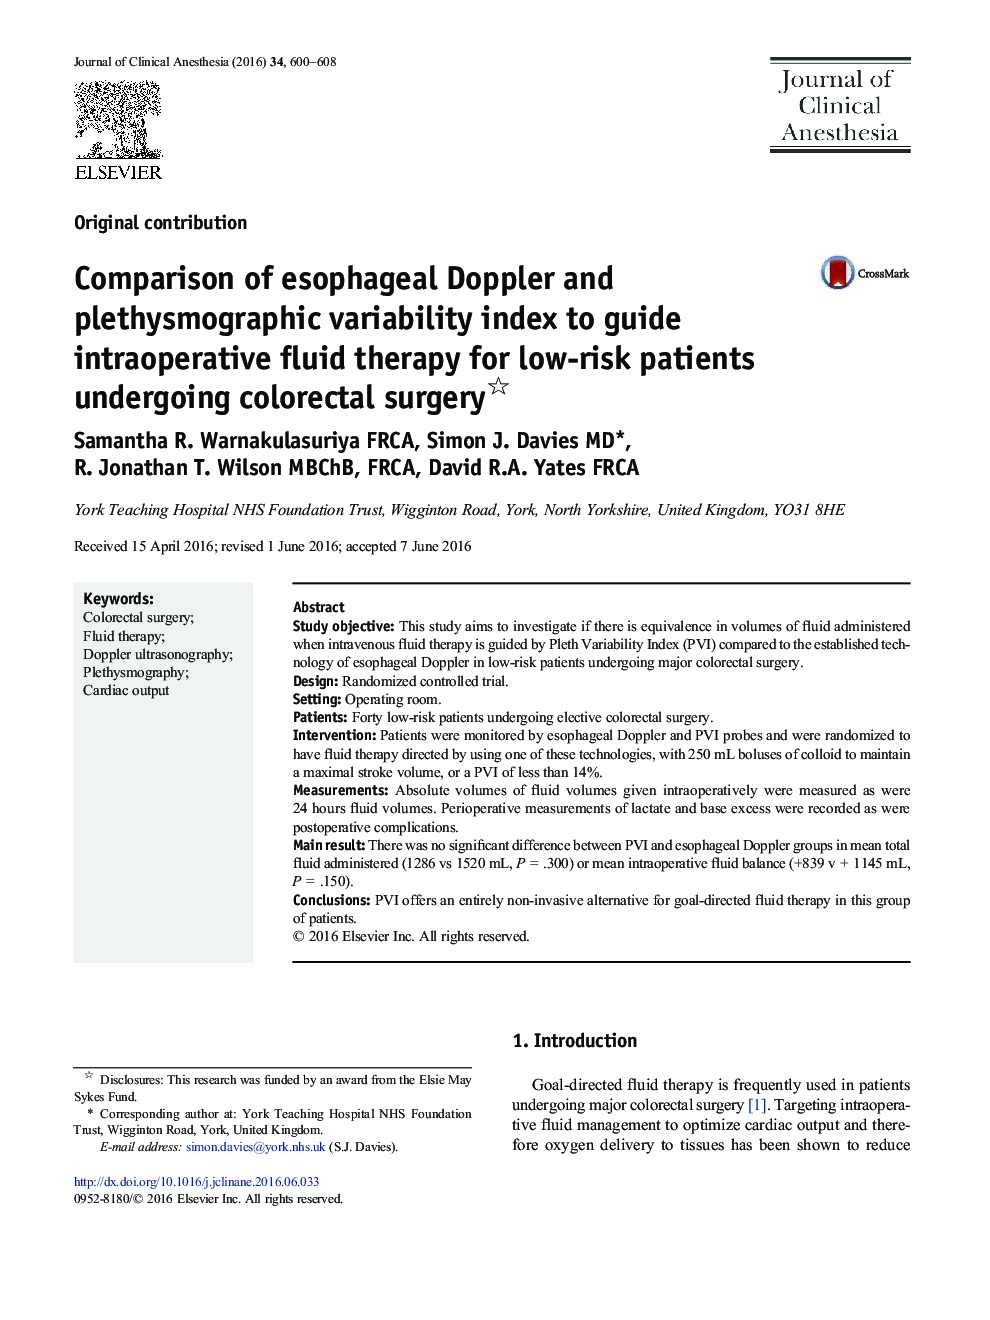 Comparison of esophageal Doppler and plethysmographic variability index to guide intraoperative fluid therapy for low-risk patients undergoing colorectal surgery